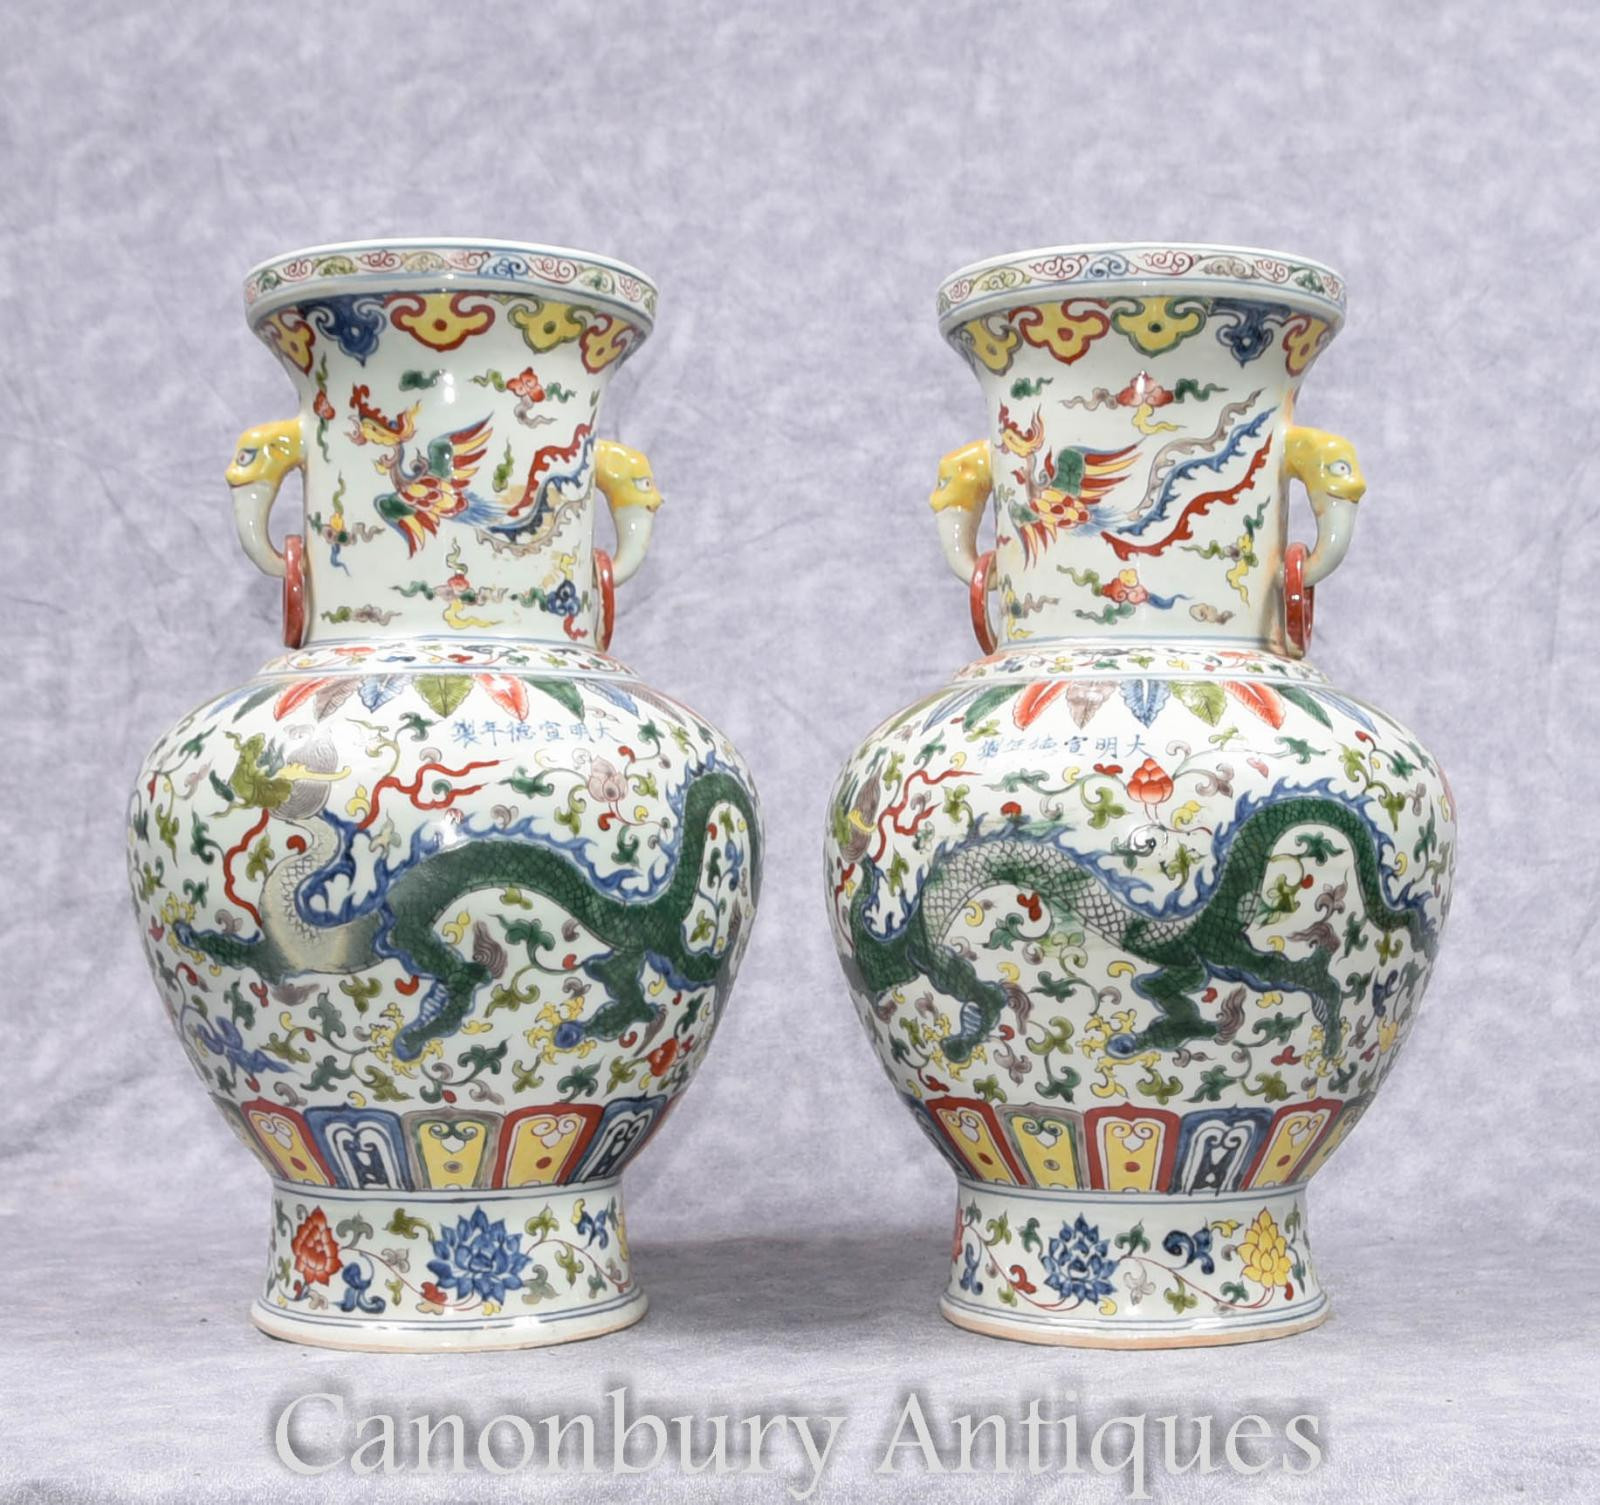 29 Fashionable Antique Chinese Celadon Vases 2024 free download antique chinese celadon vases of pair chinese qianlong porcelain vases dragon urns ceramic china ebay for please contact us if you would like to view any of these items at our showroom